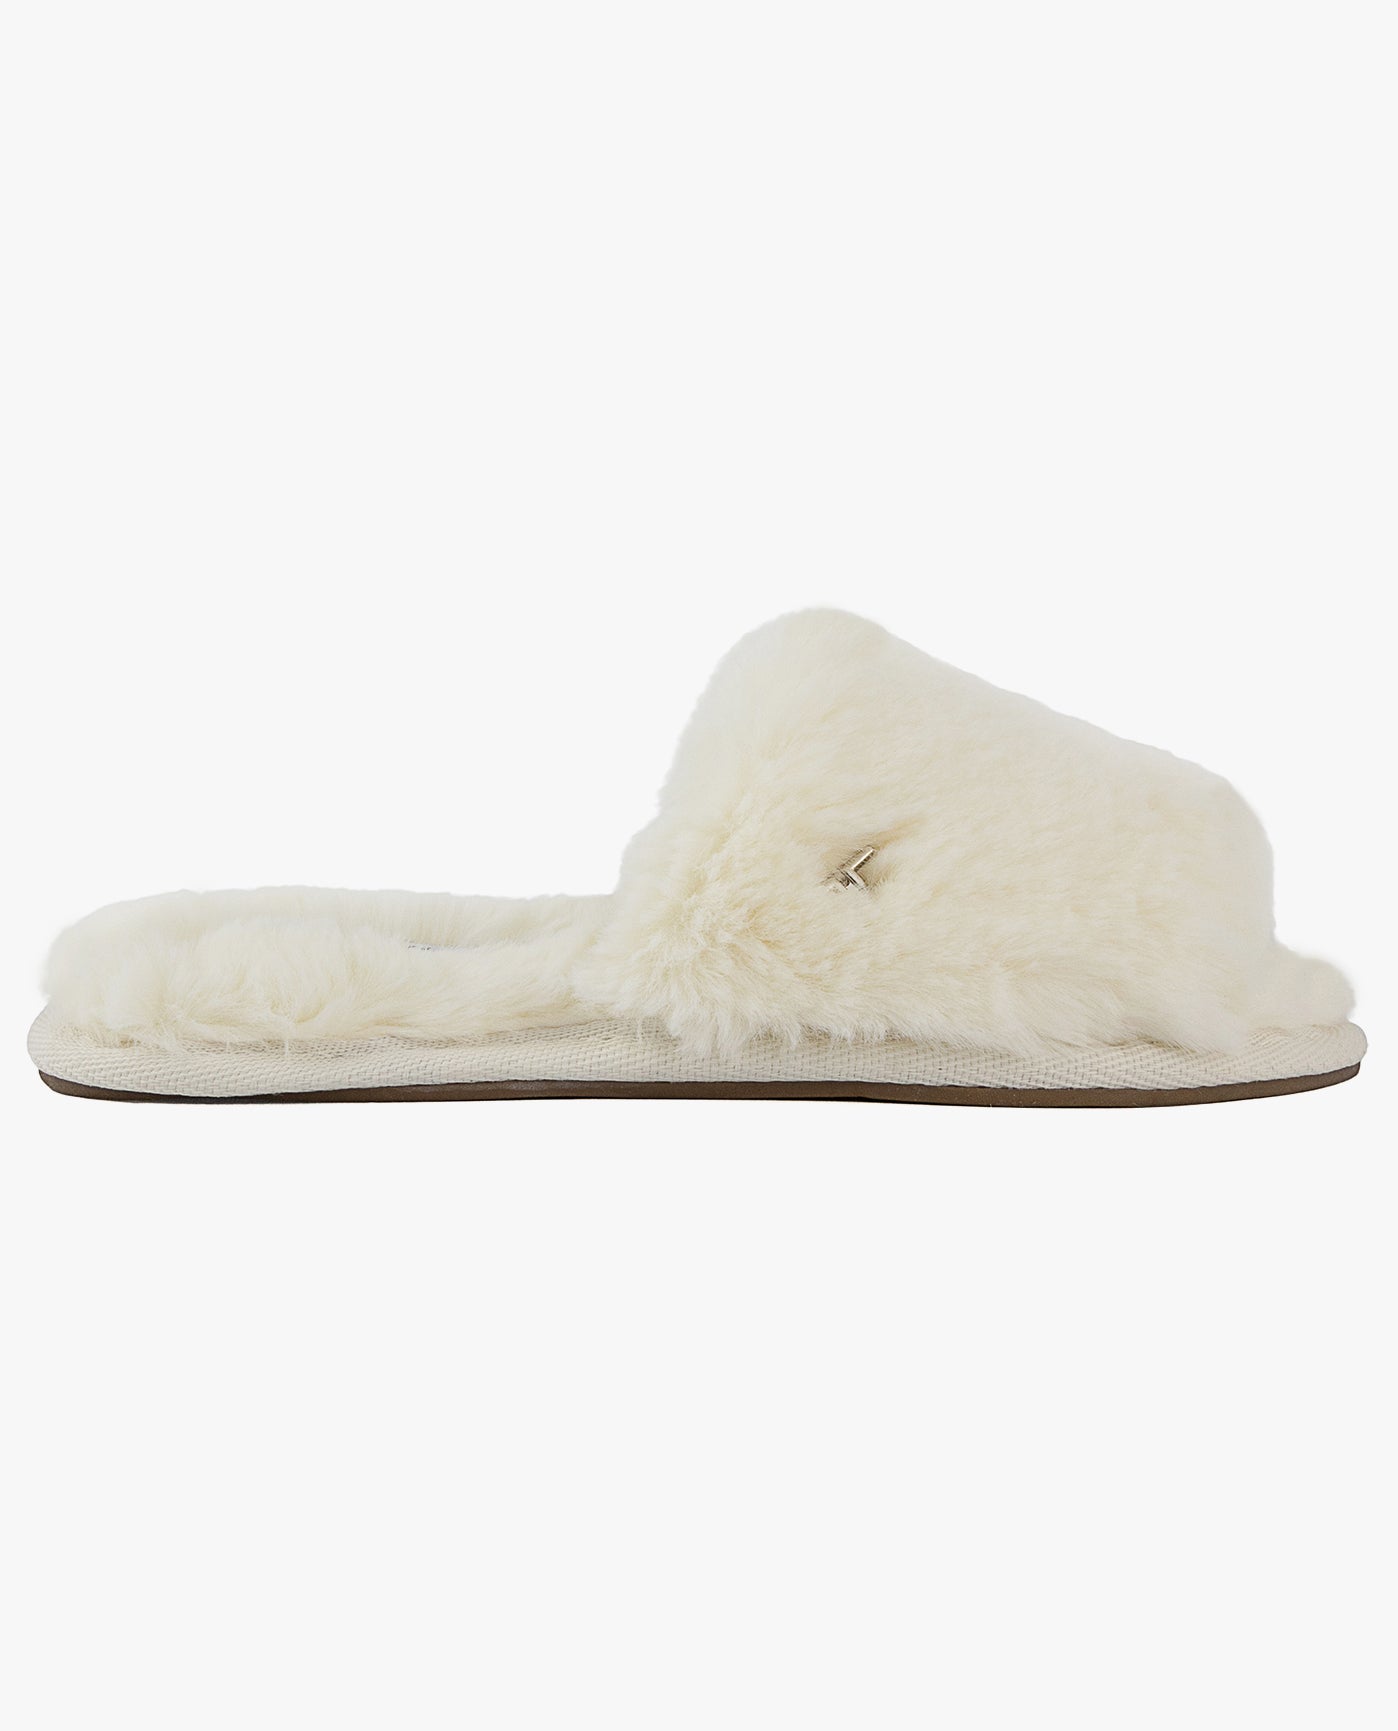 OTHER SIDE VIEW  OF WOMENS LILLY OPEN TOE FAUX FUR SLIPPER | ESO_IVORY_100